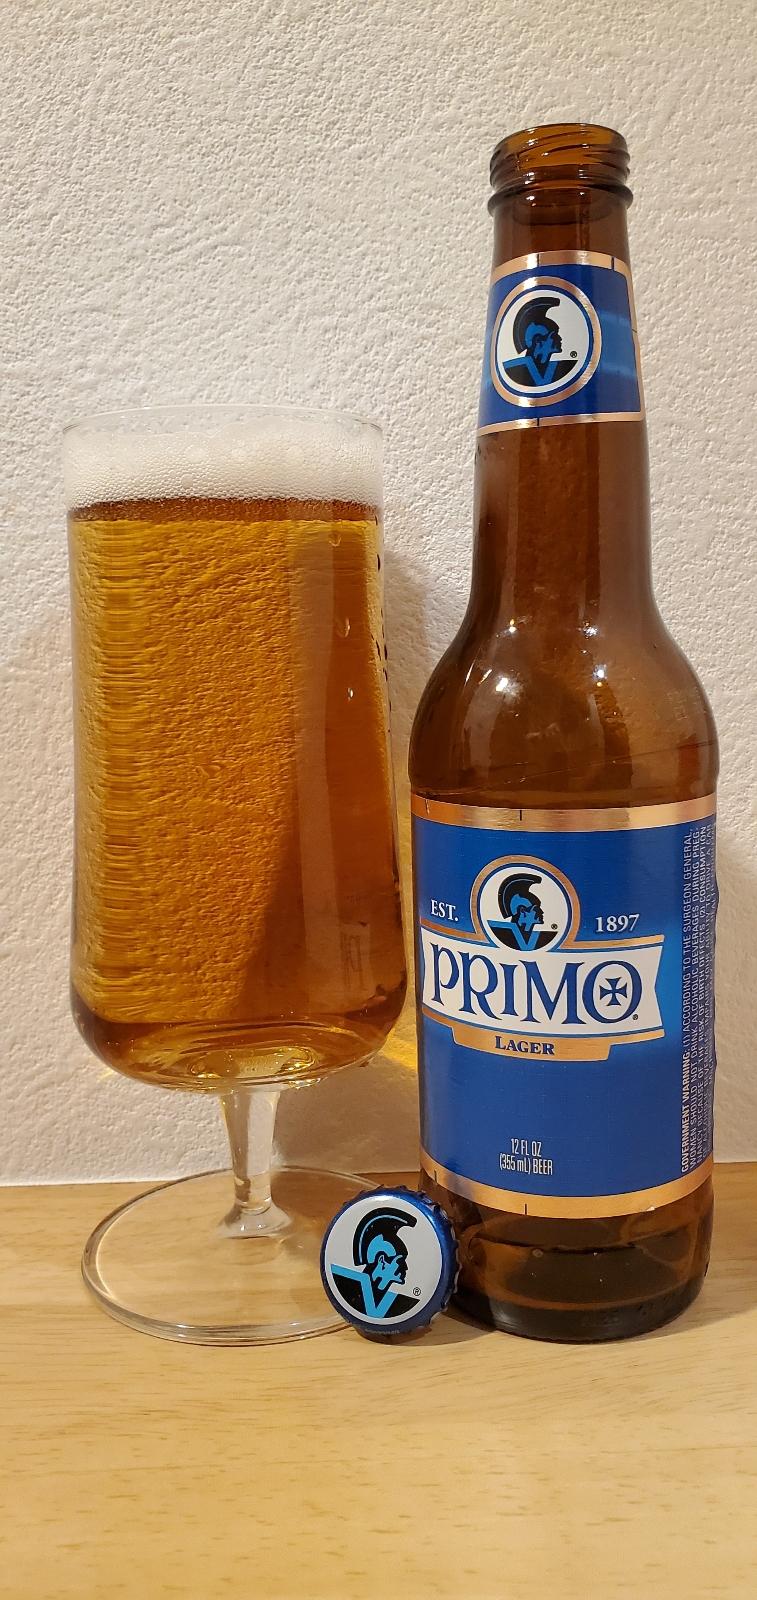 Primo Lager